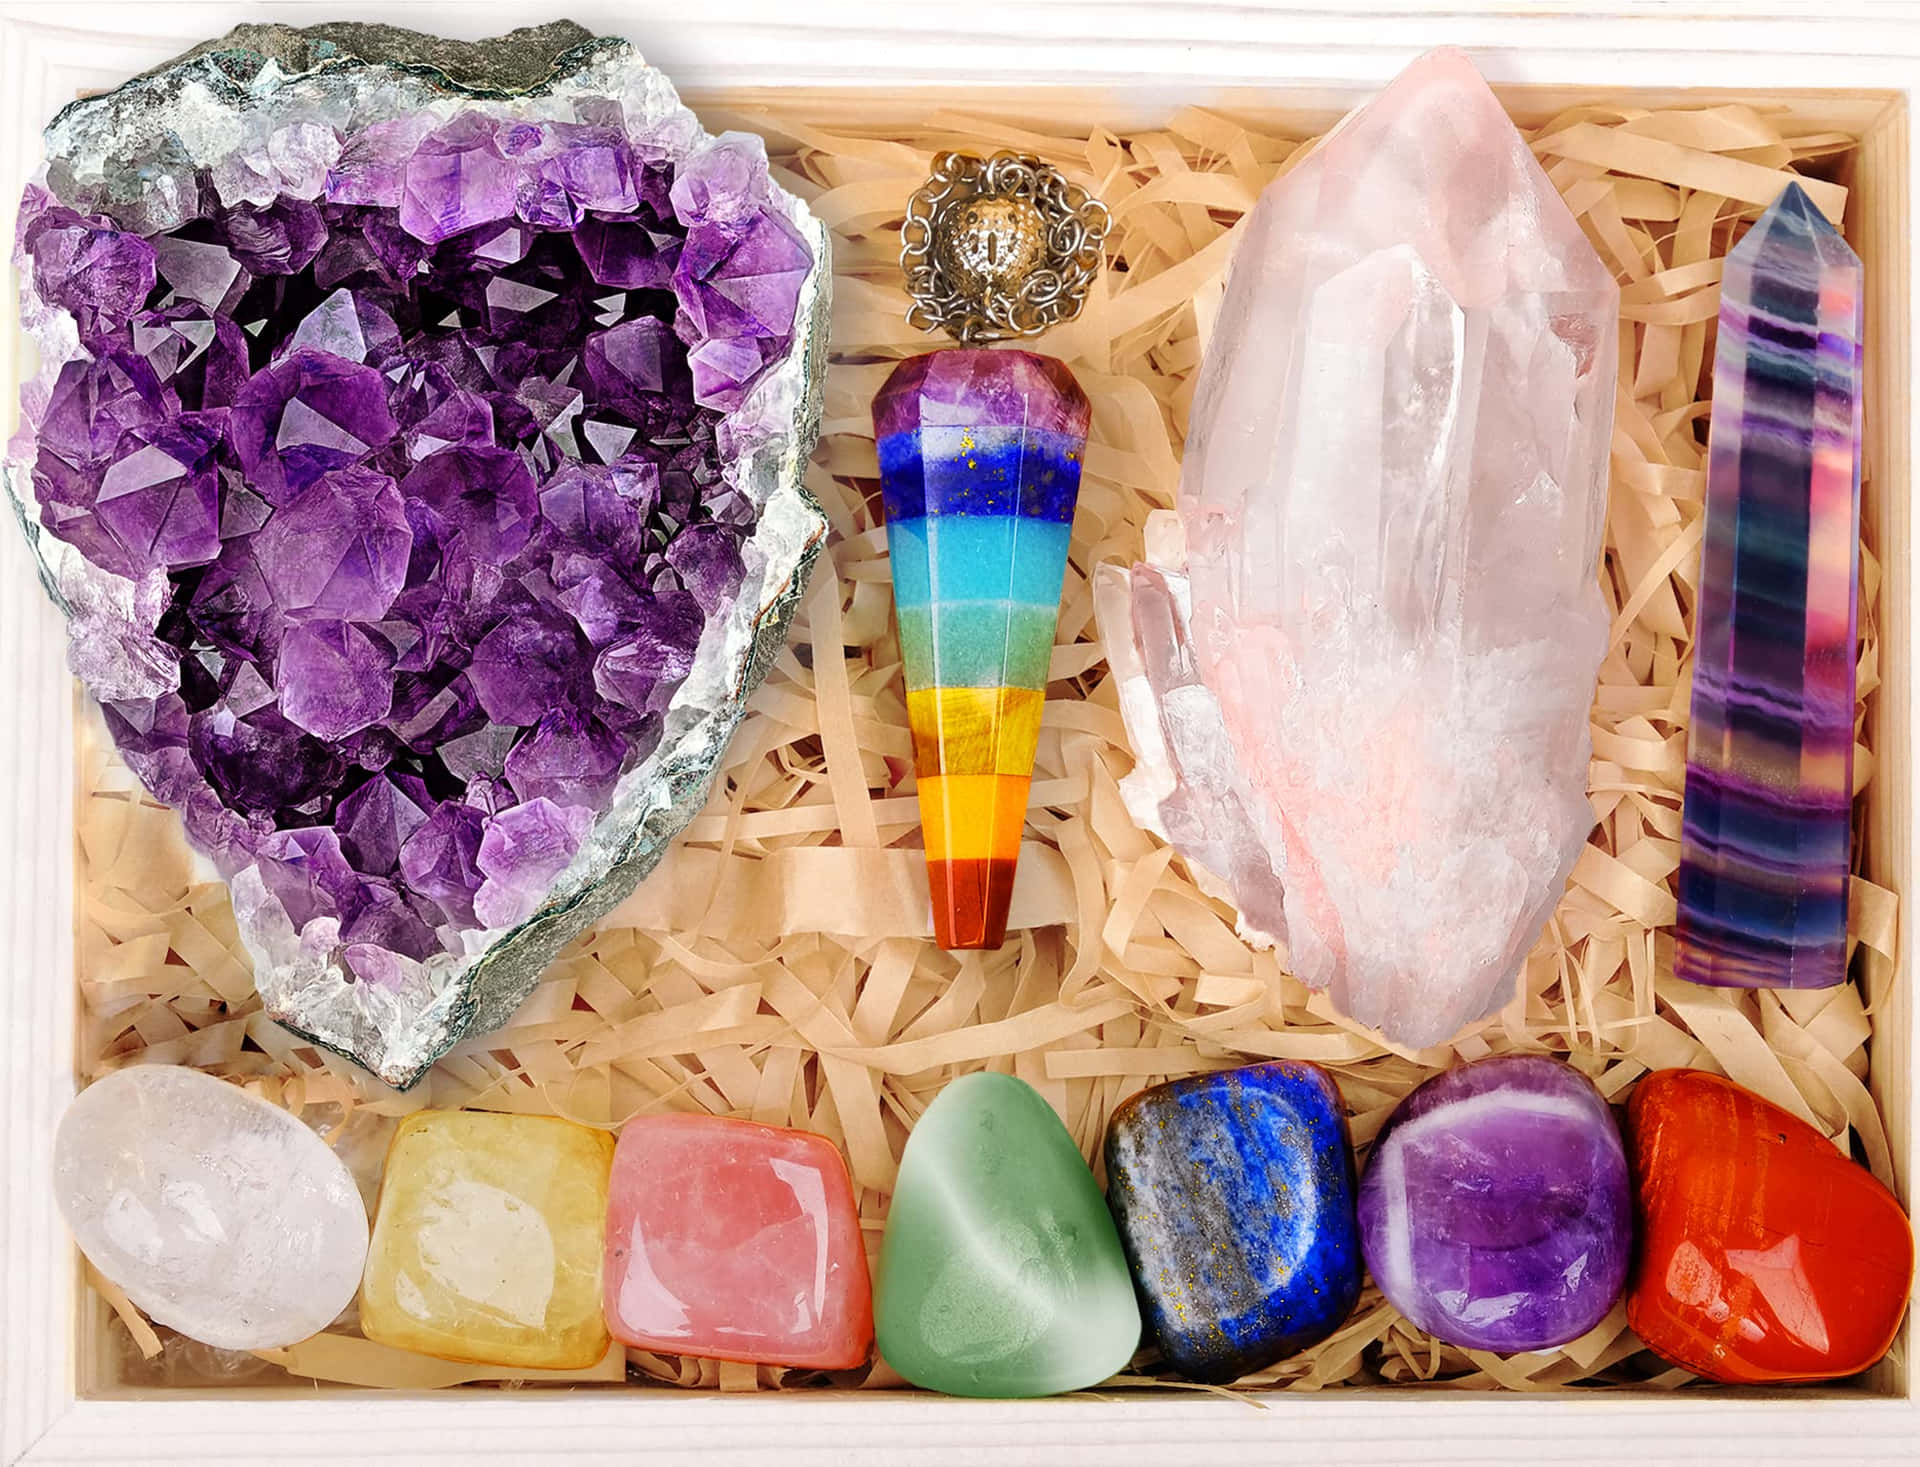 A Box With Various Crystals And Stones In It